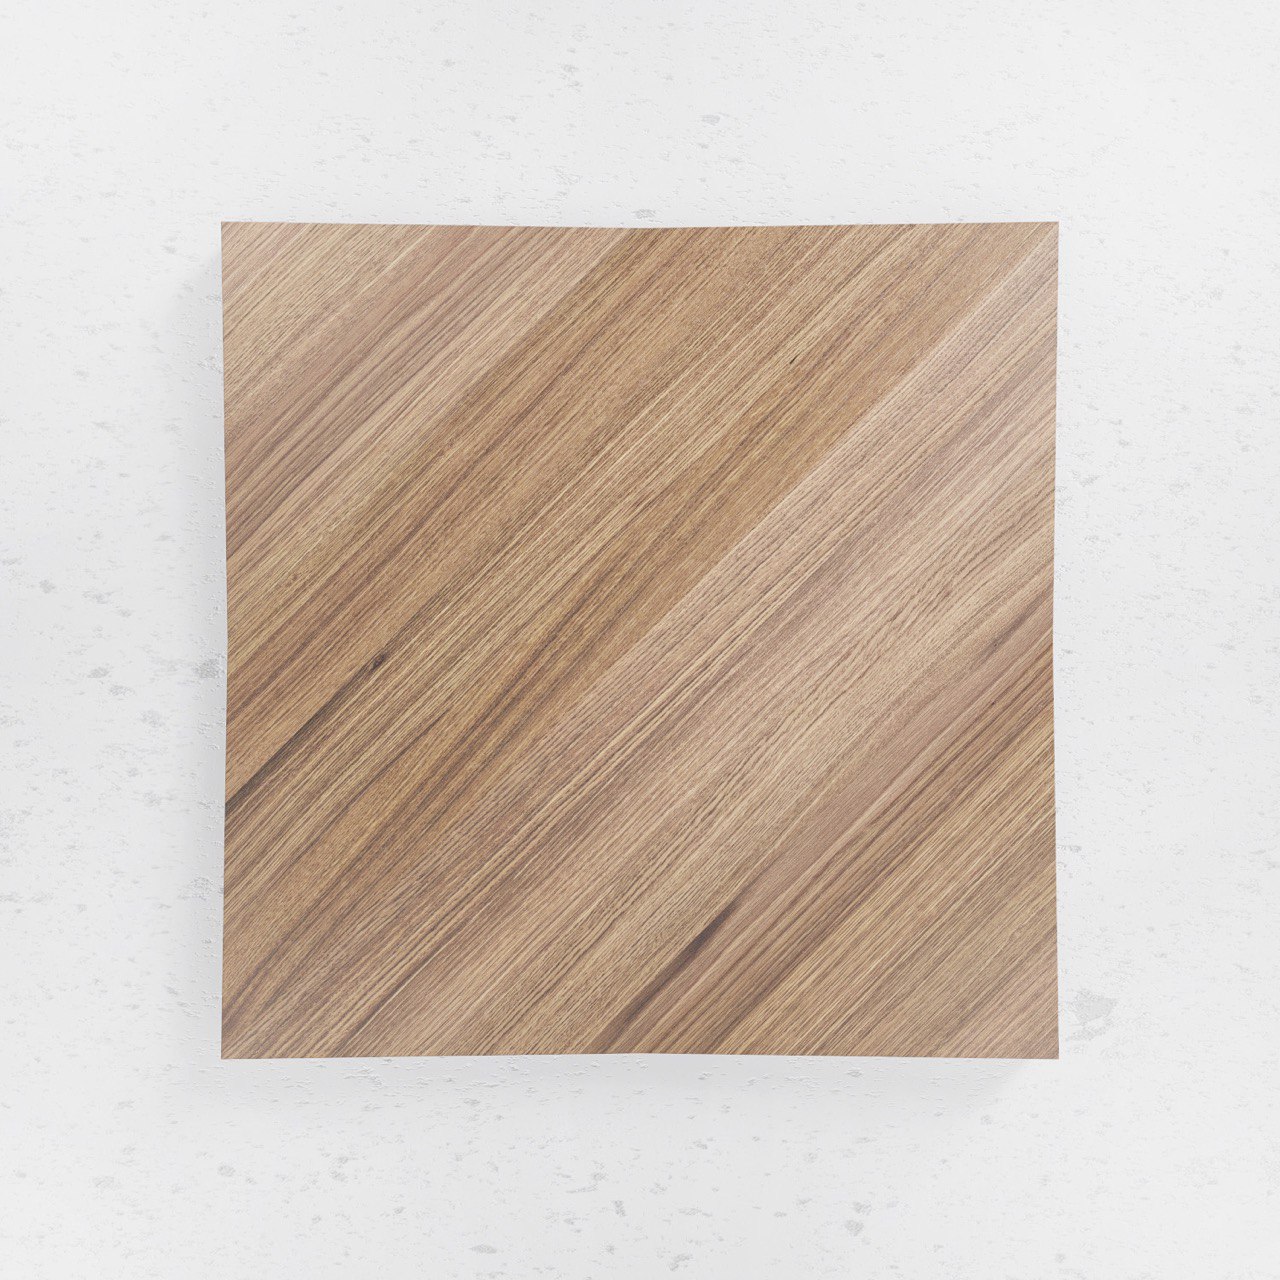 Wooden P3 wall panel